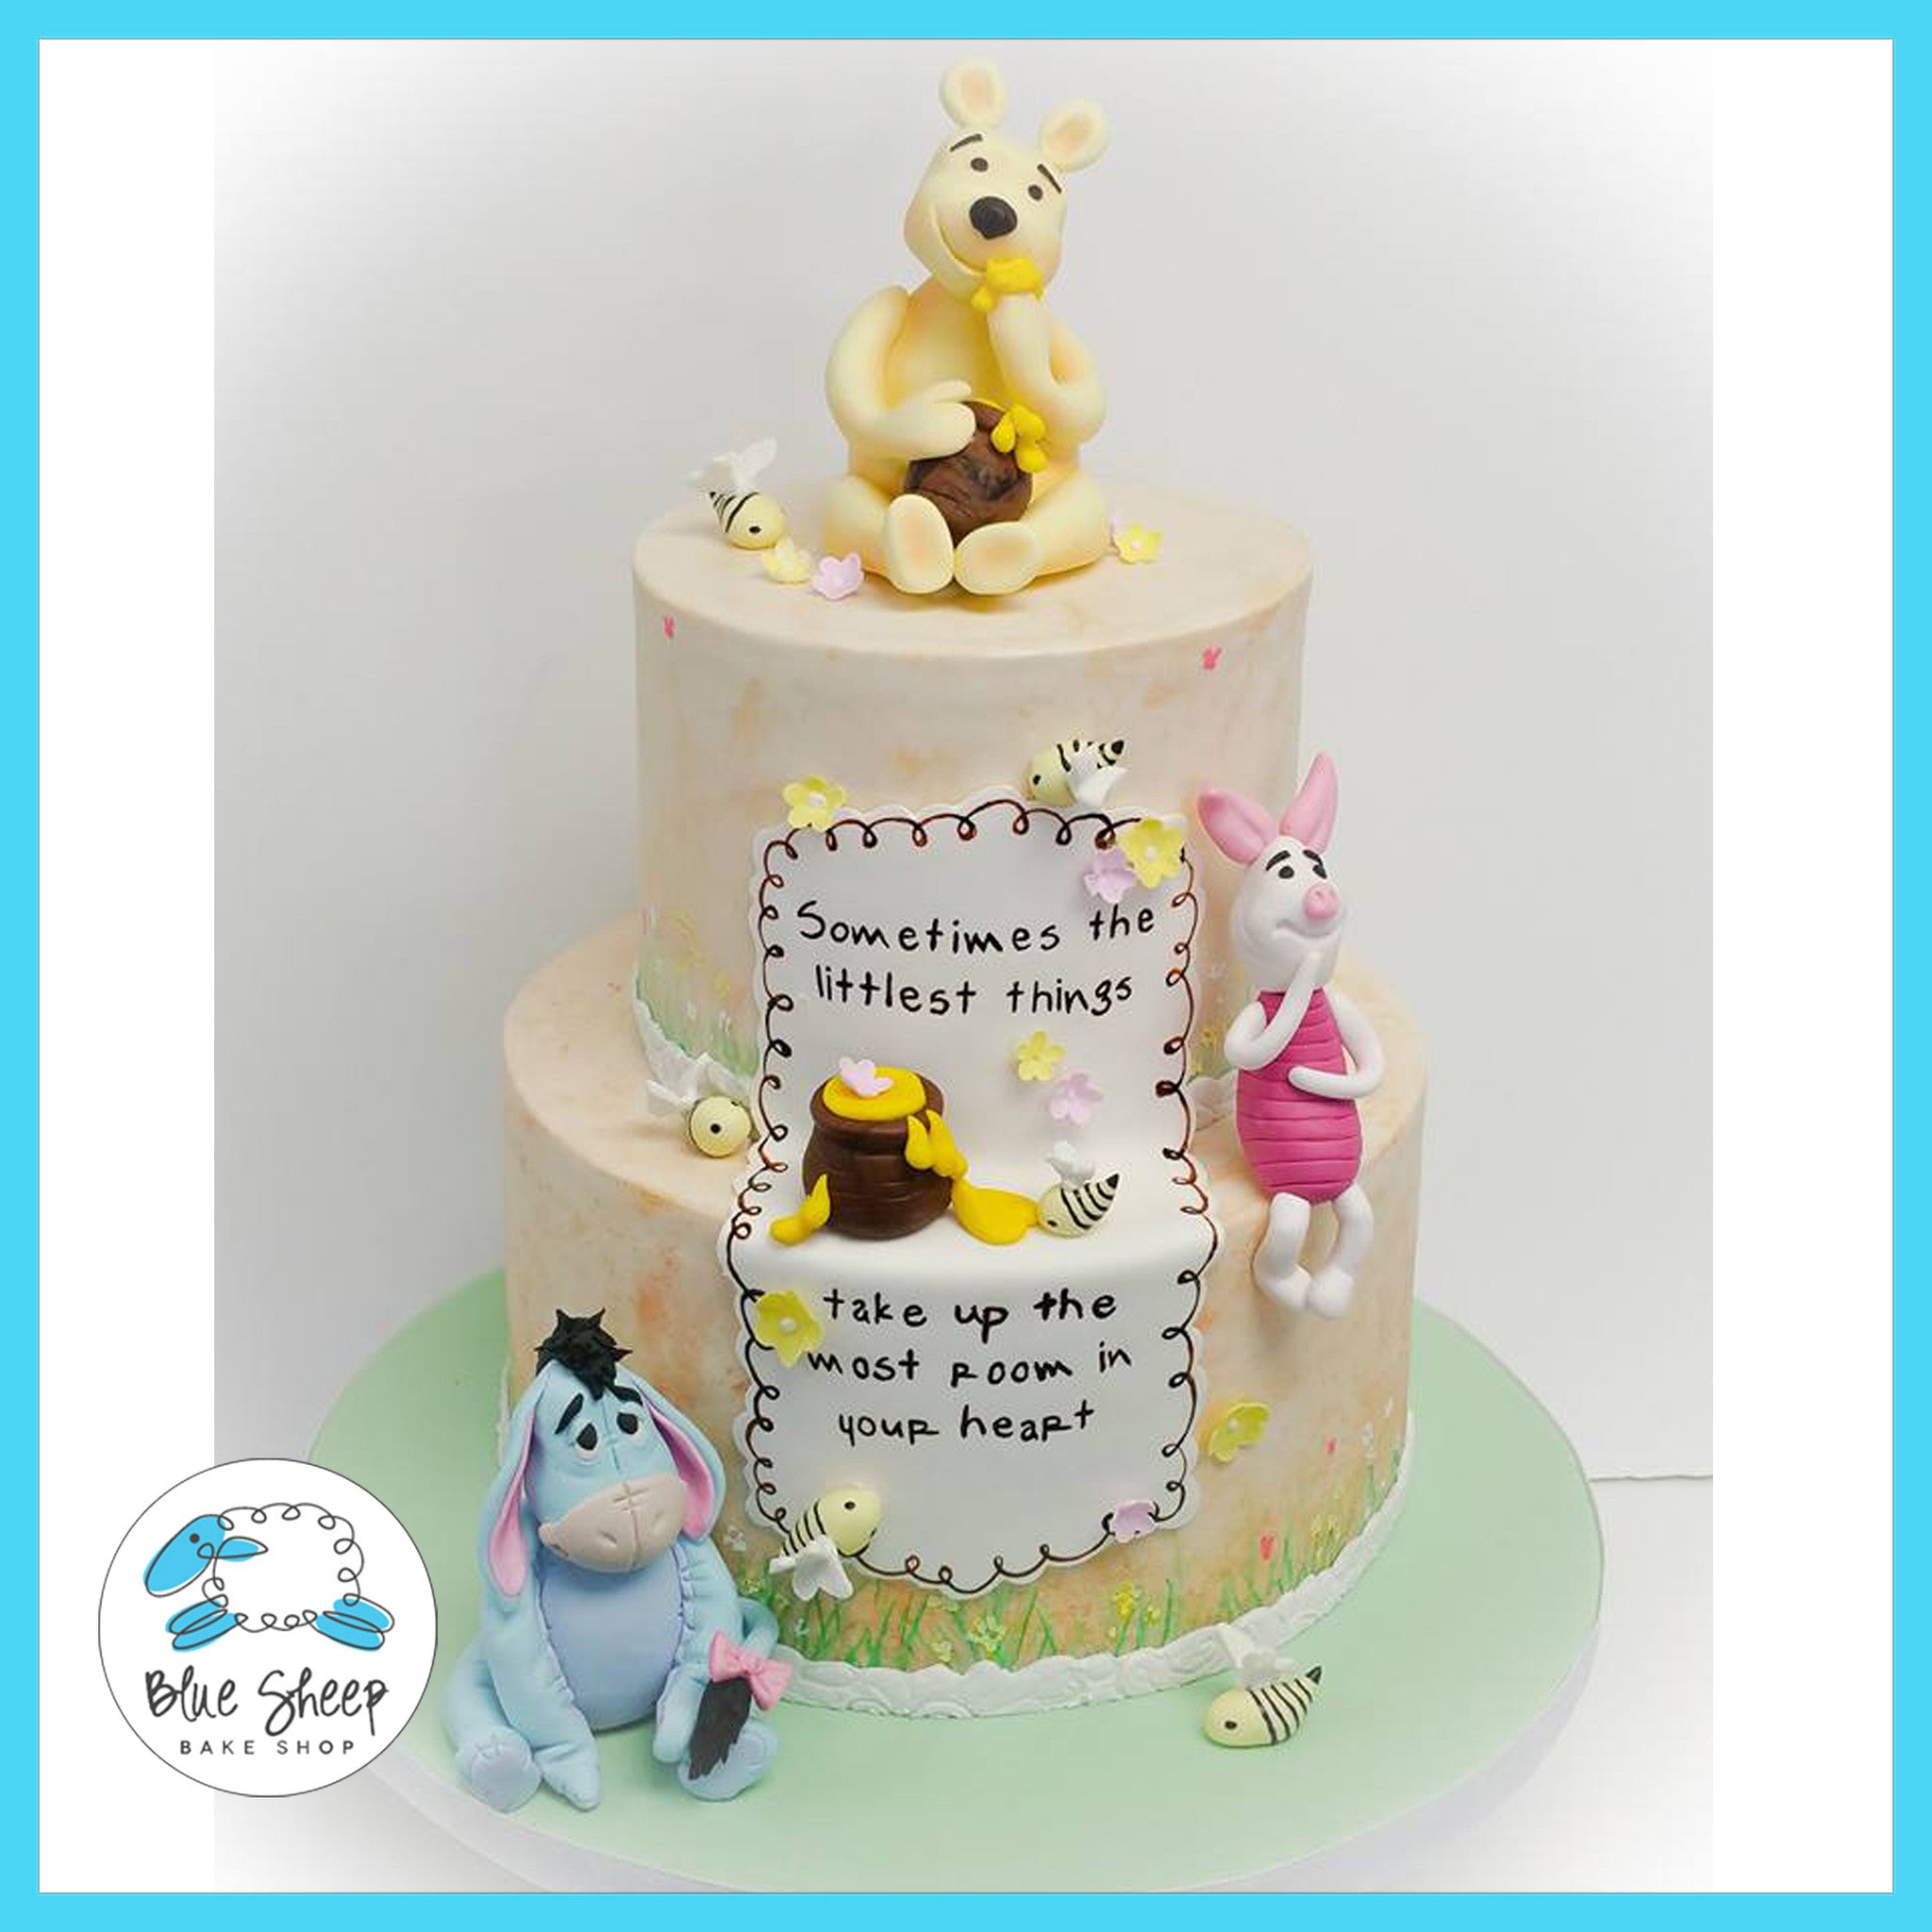 S'pore Bakery Has Winnie The Pooh Cakes So You Can Summon Your Hundred Acre  Wood Friends For Birthdays